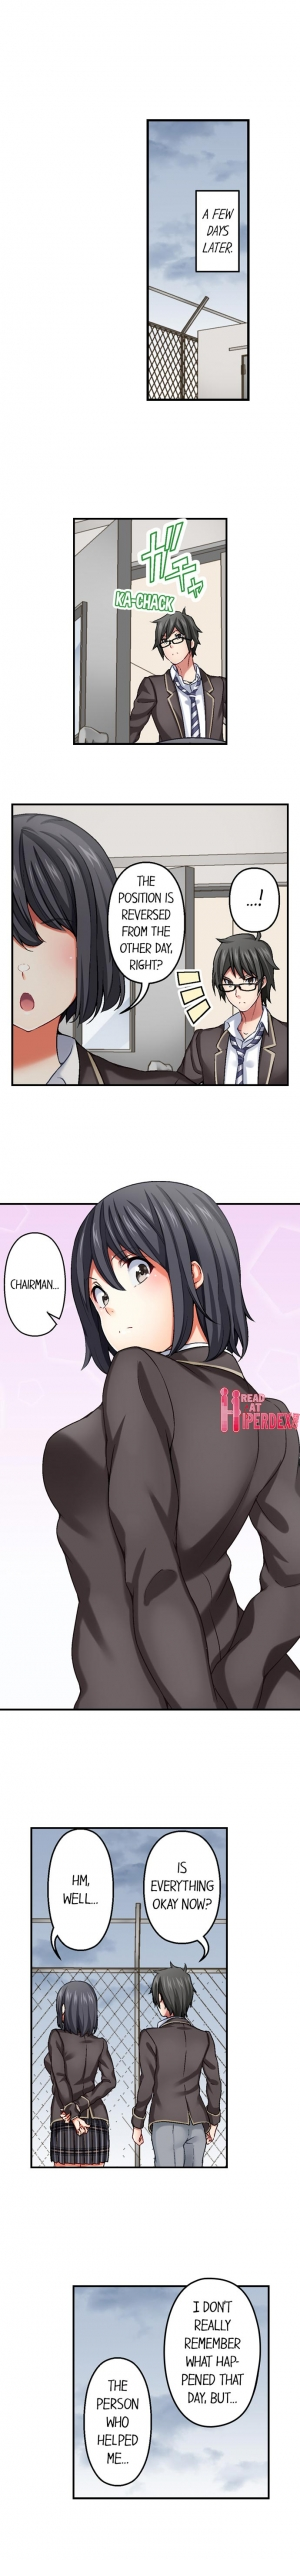 [Home Guardian] Nozoki Connect (Ch.1-12) [English] - Page 89